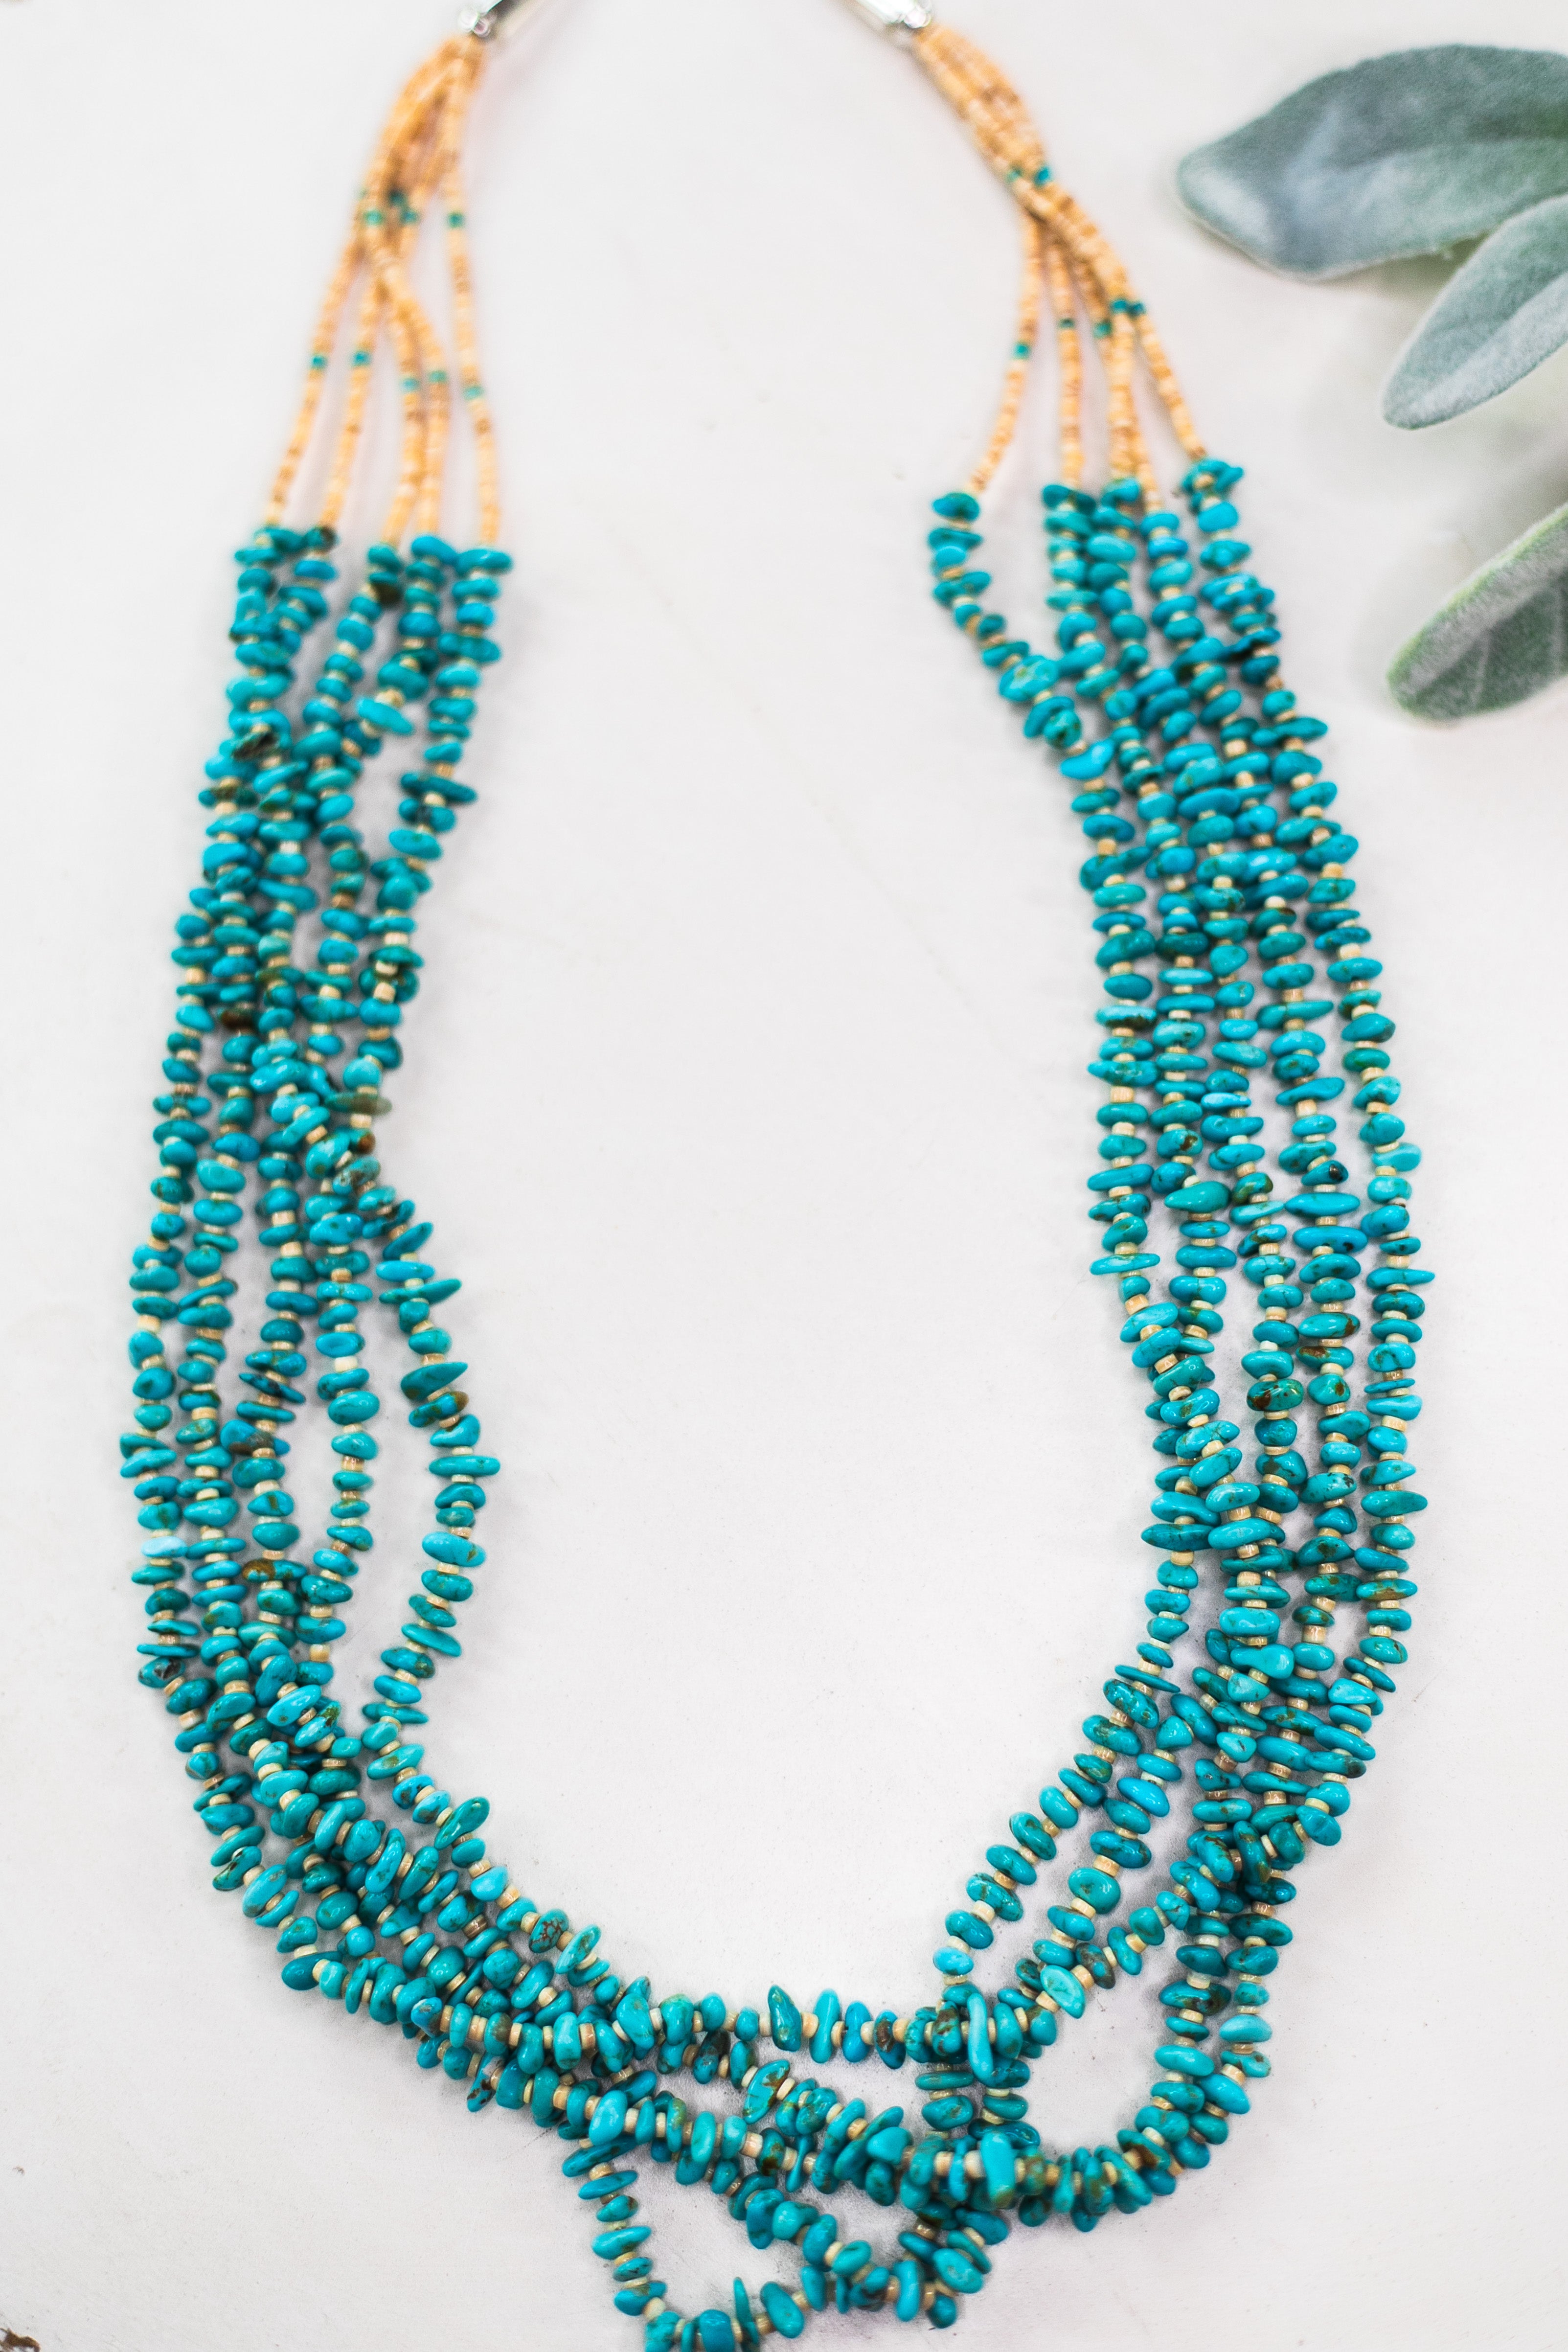 Navajo | Authentic Five Strand Turquoise and Heishi Necklace